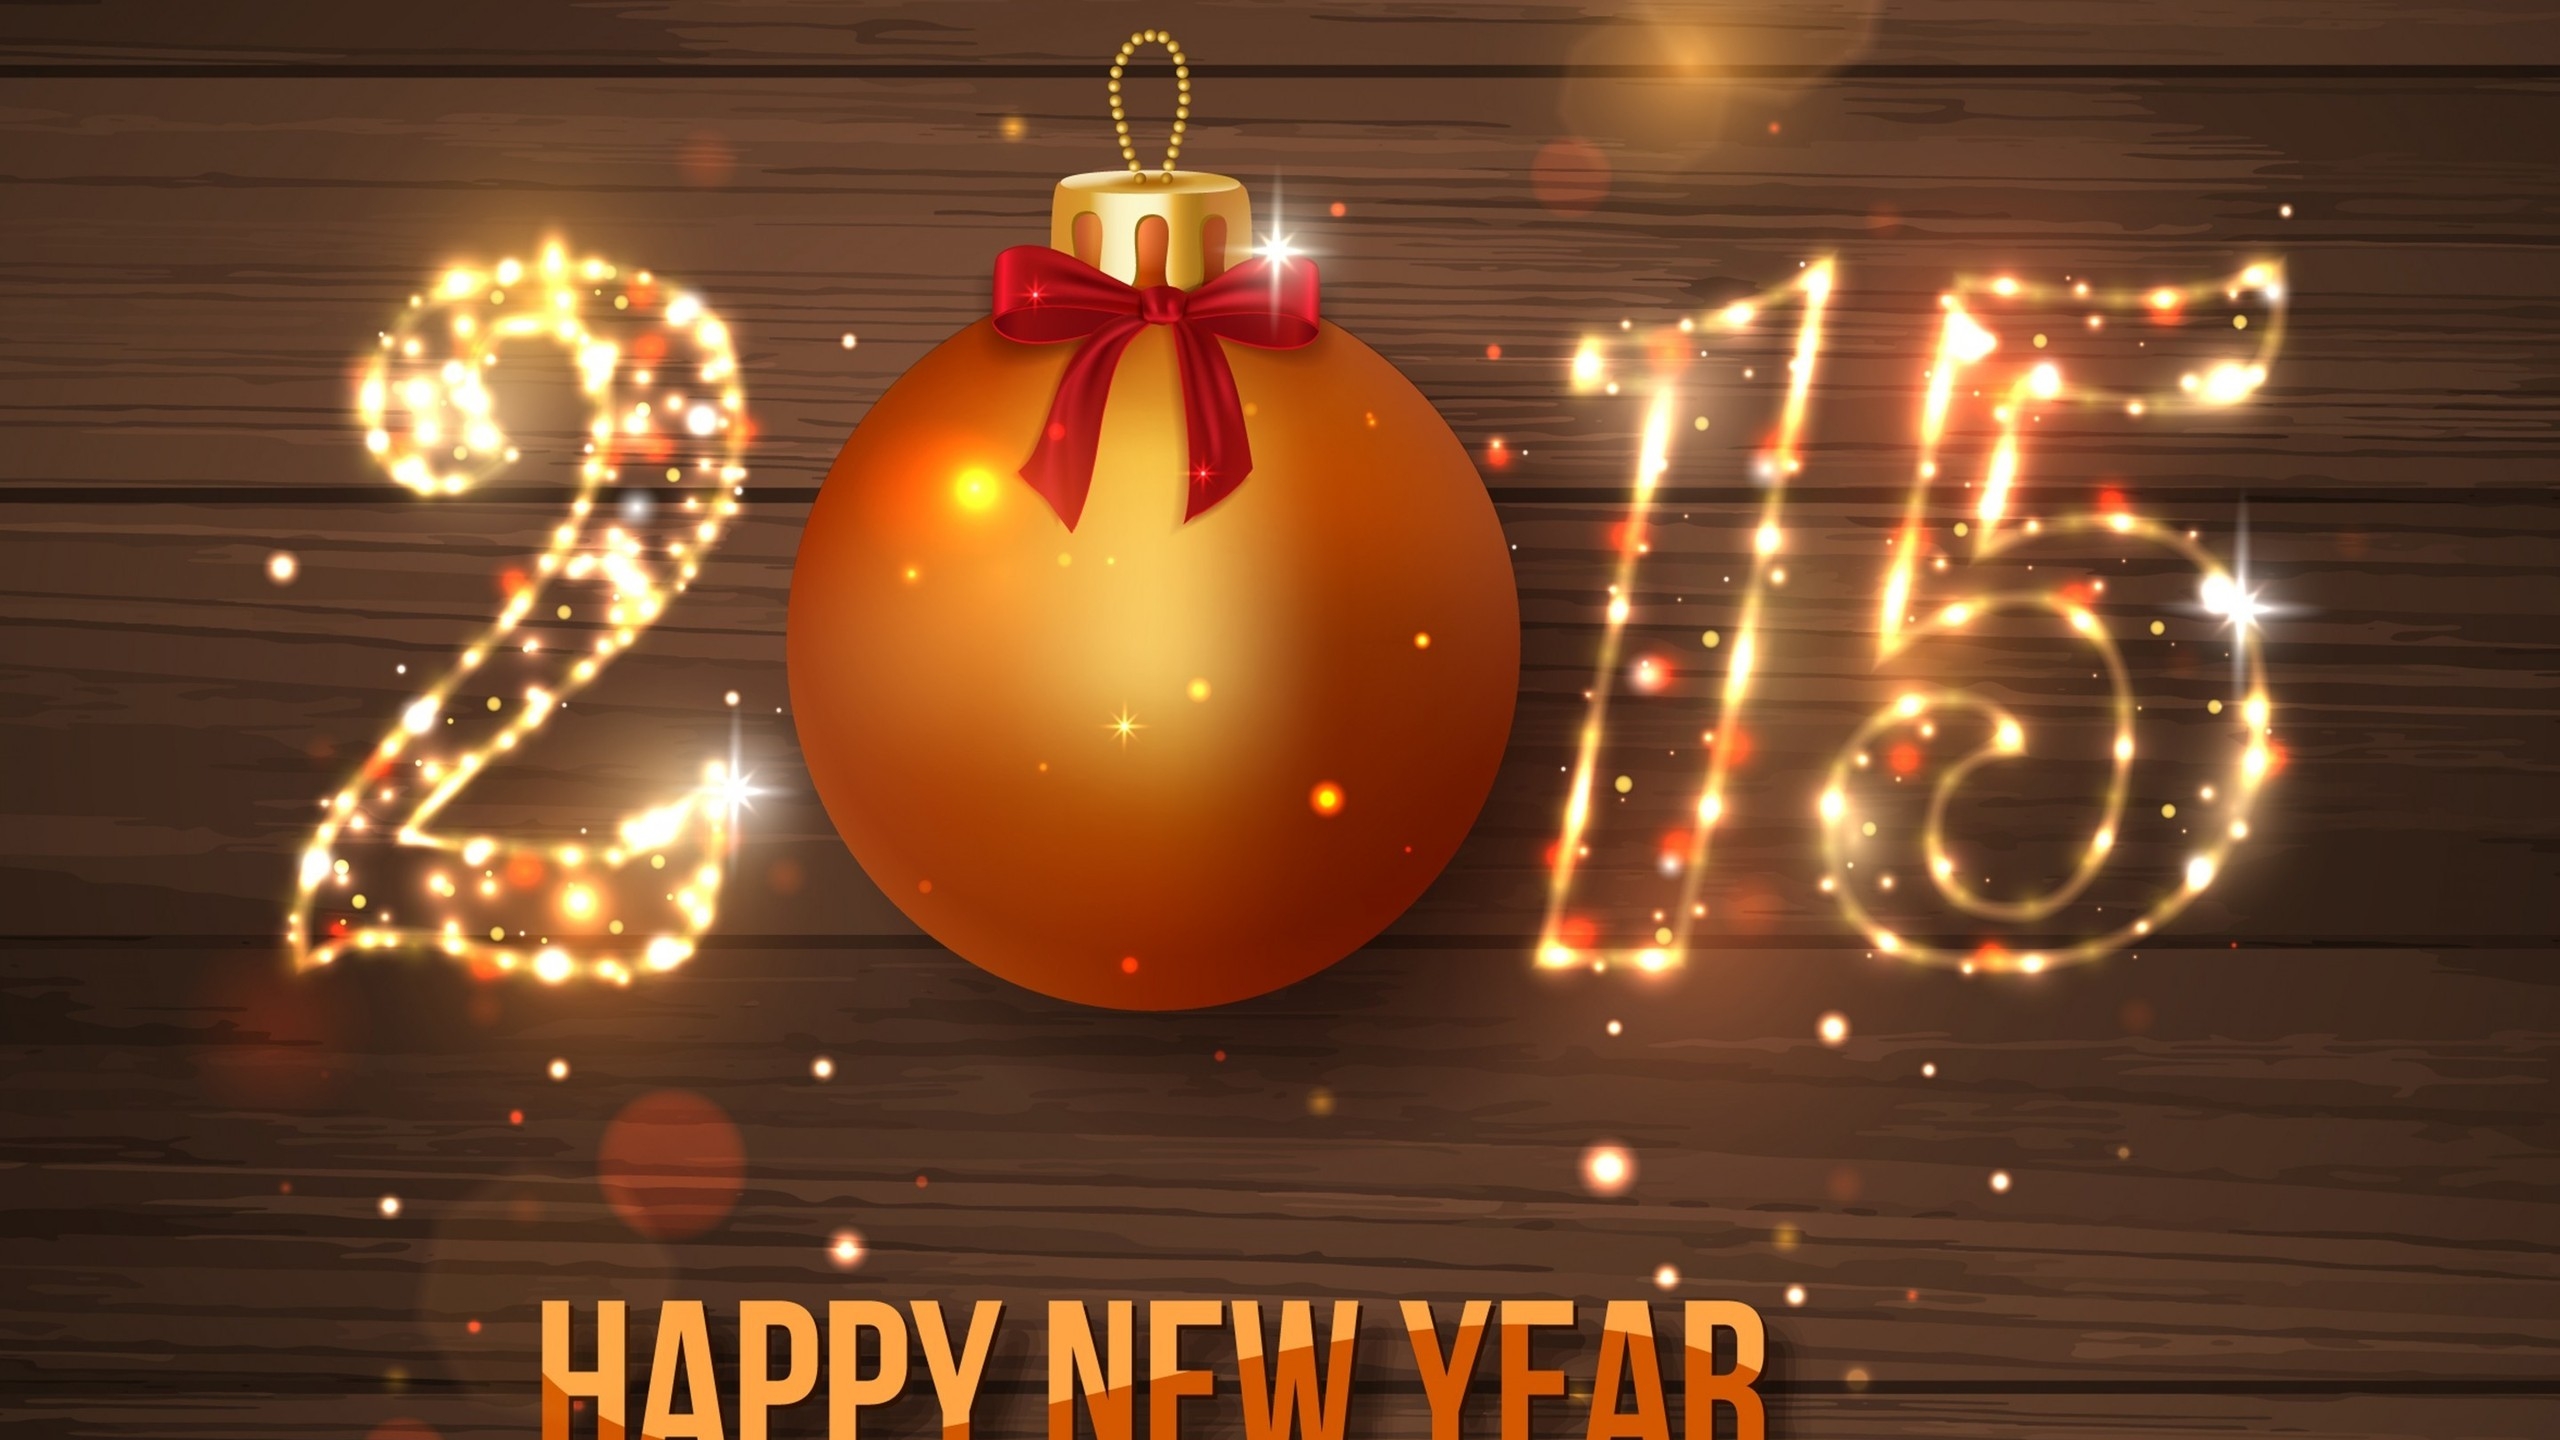 2015 Happy New Year for 2560x1440 HDTV resolution